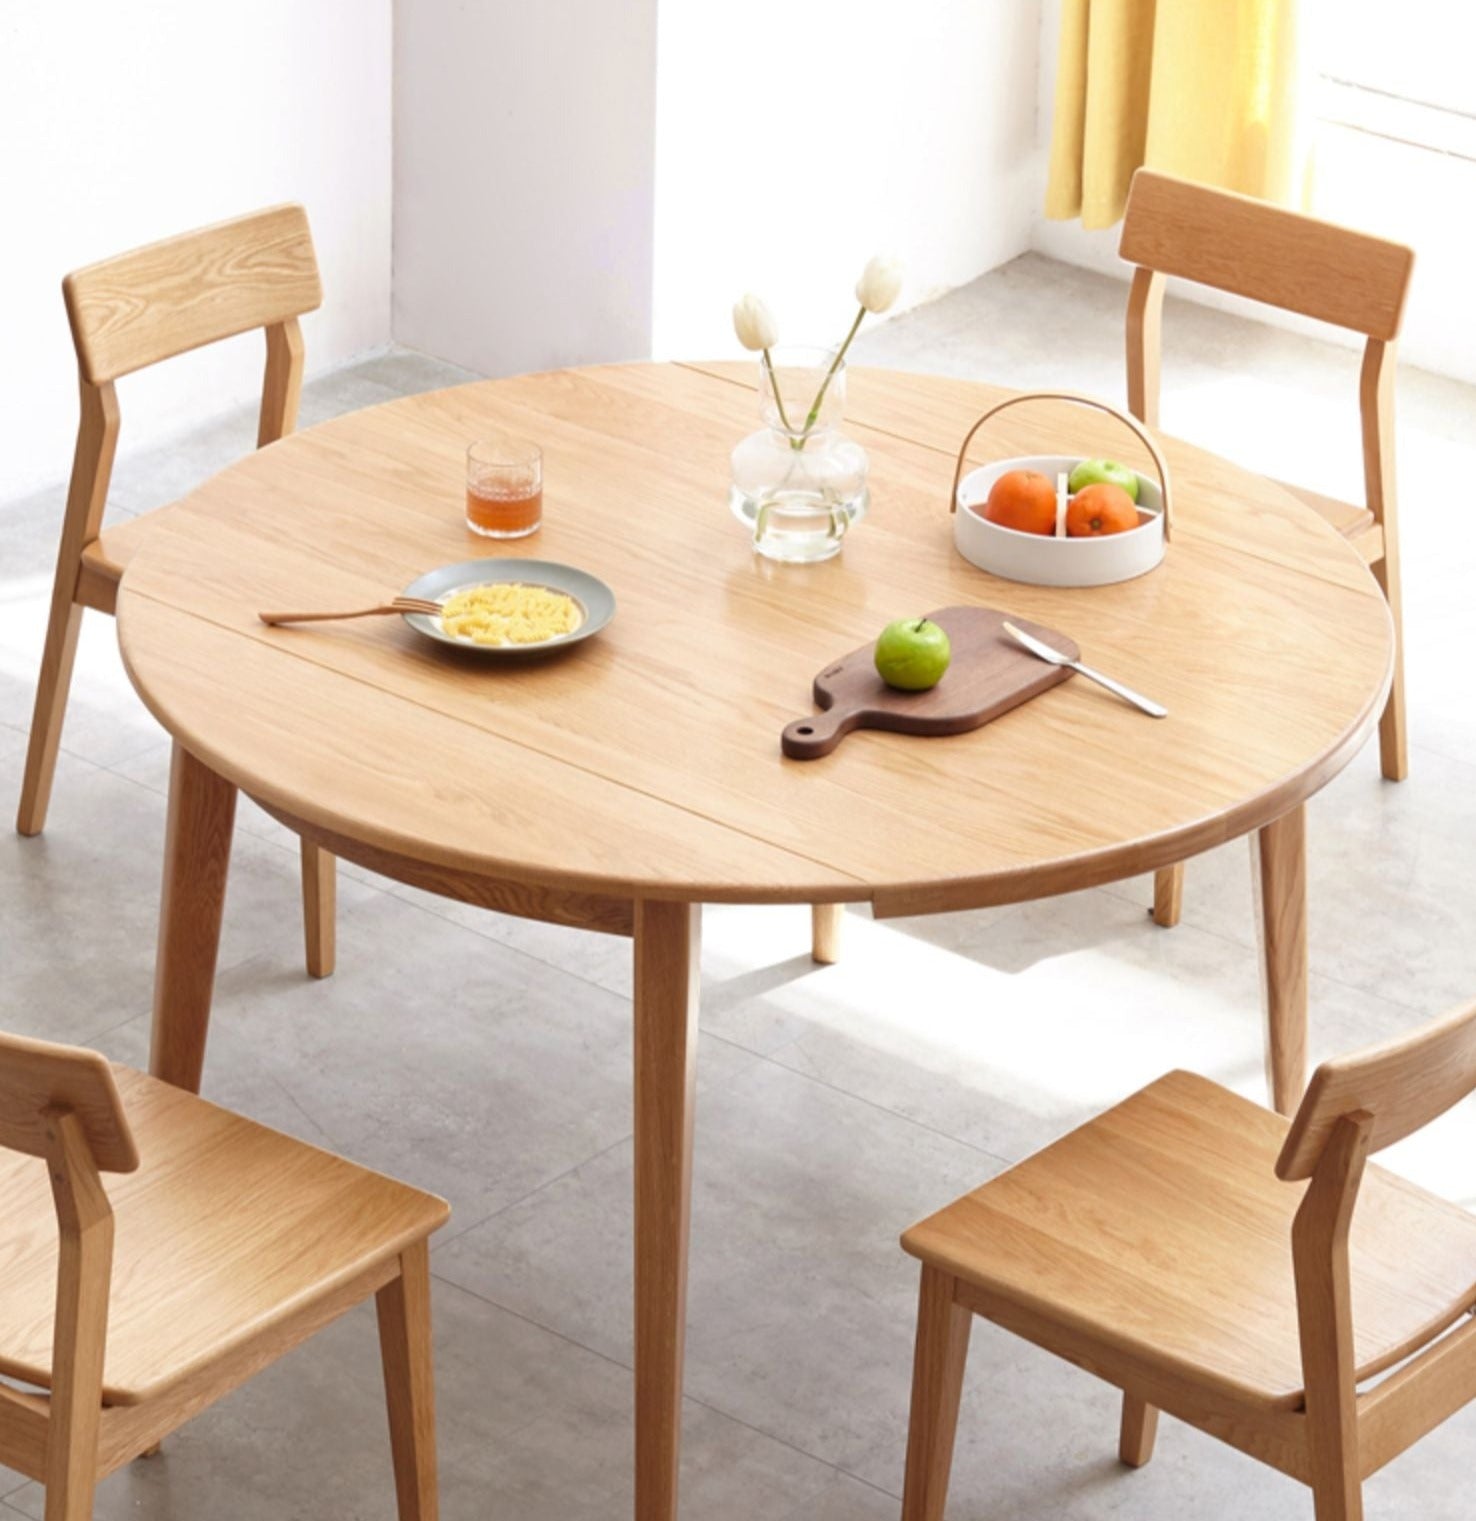 Oak solid wood folding dining table small apartment"